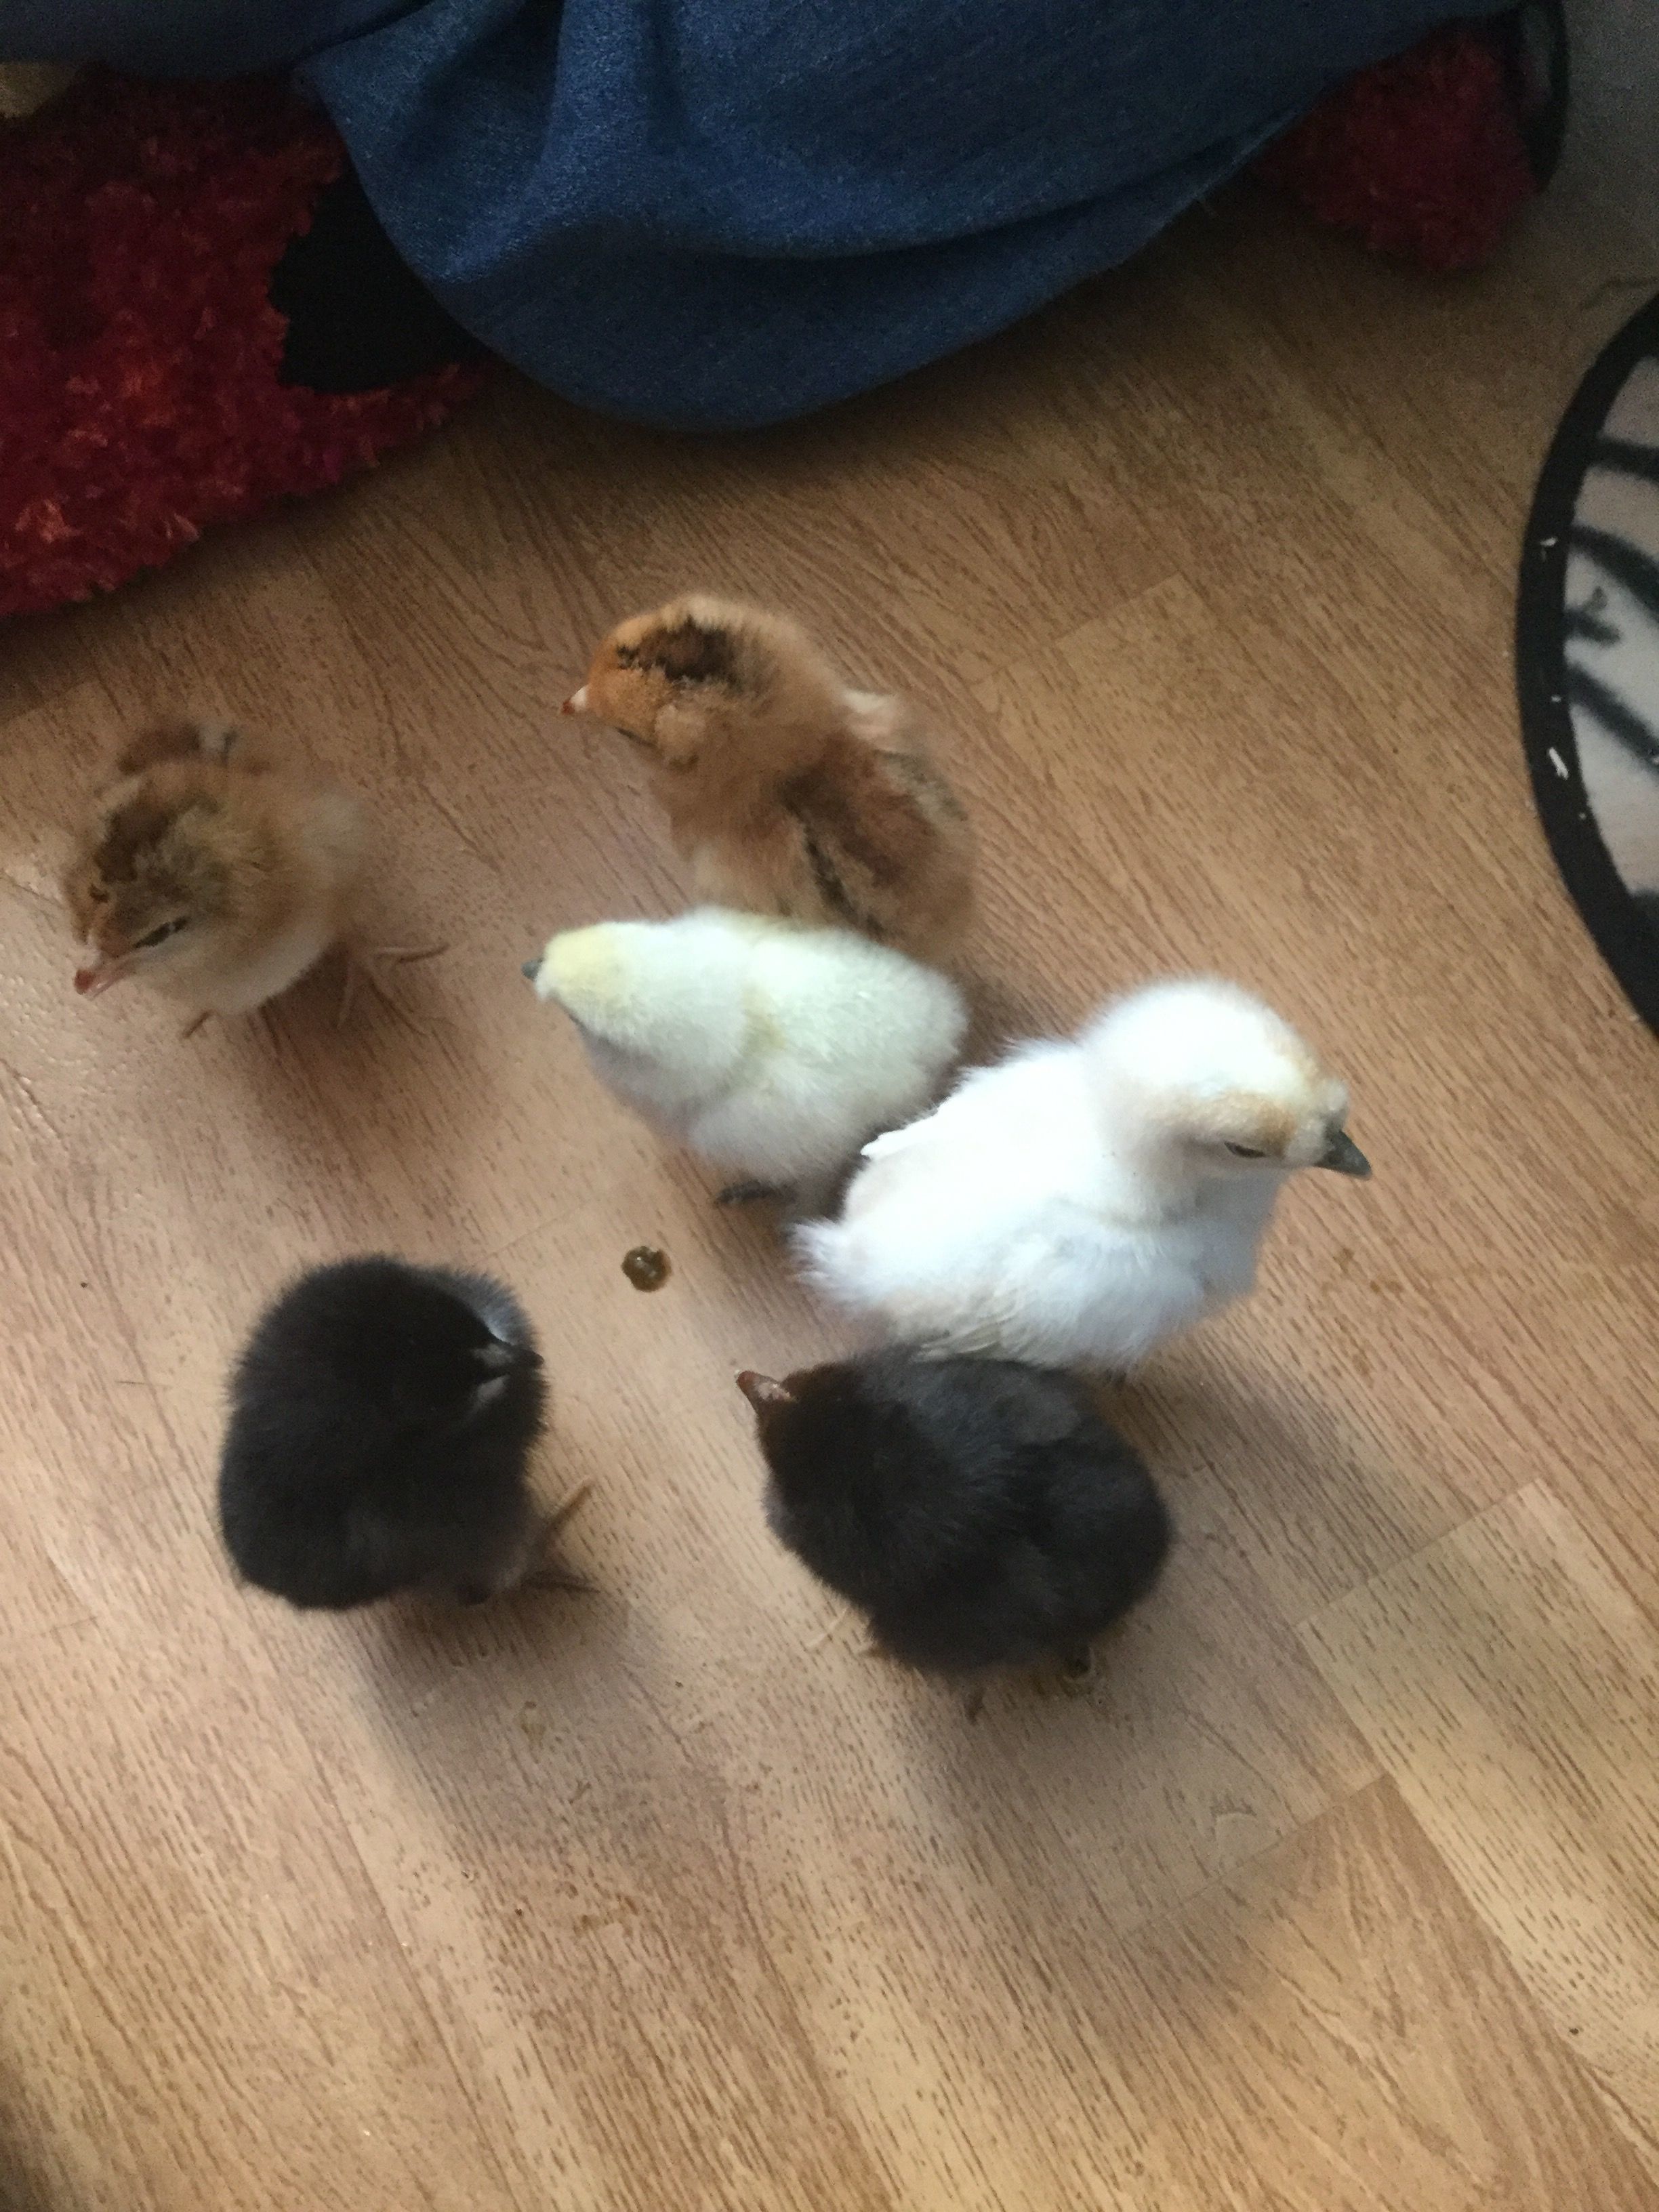 These are my 6 tractor supply chicks I got they are about 2-3 months old now and I think five out of the six are roosters so I only have one hen out of all of them and it's the smaller white silkie.